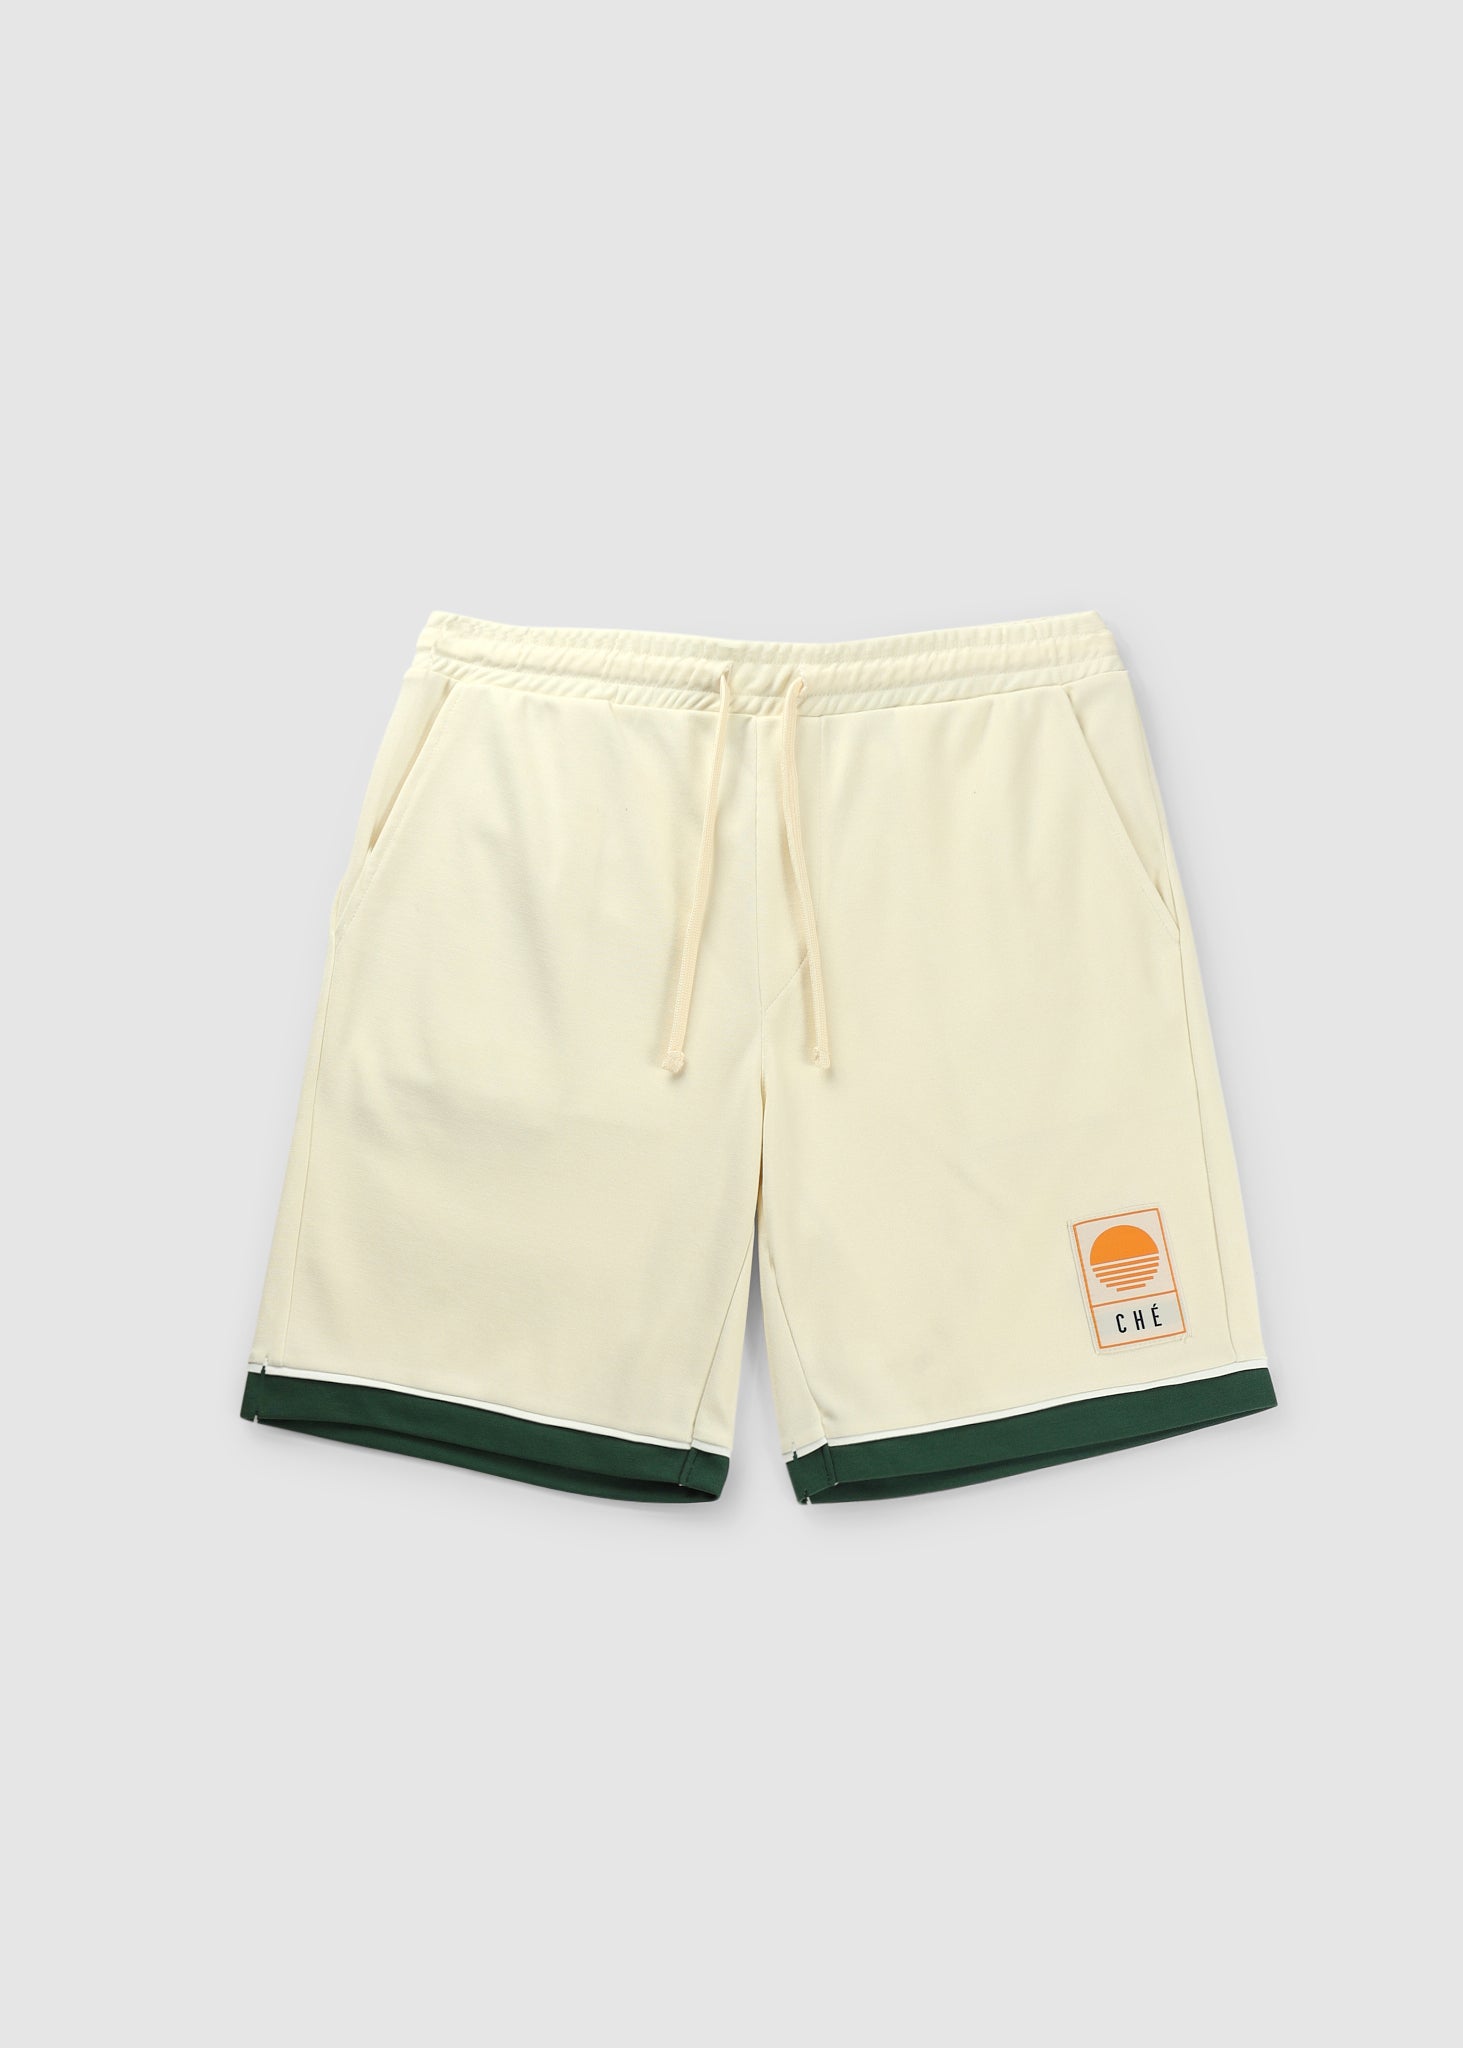 Image of Che Mens Warm Up Shorts In Ivory